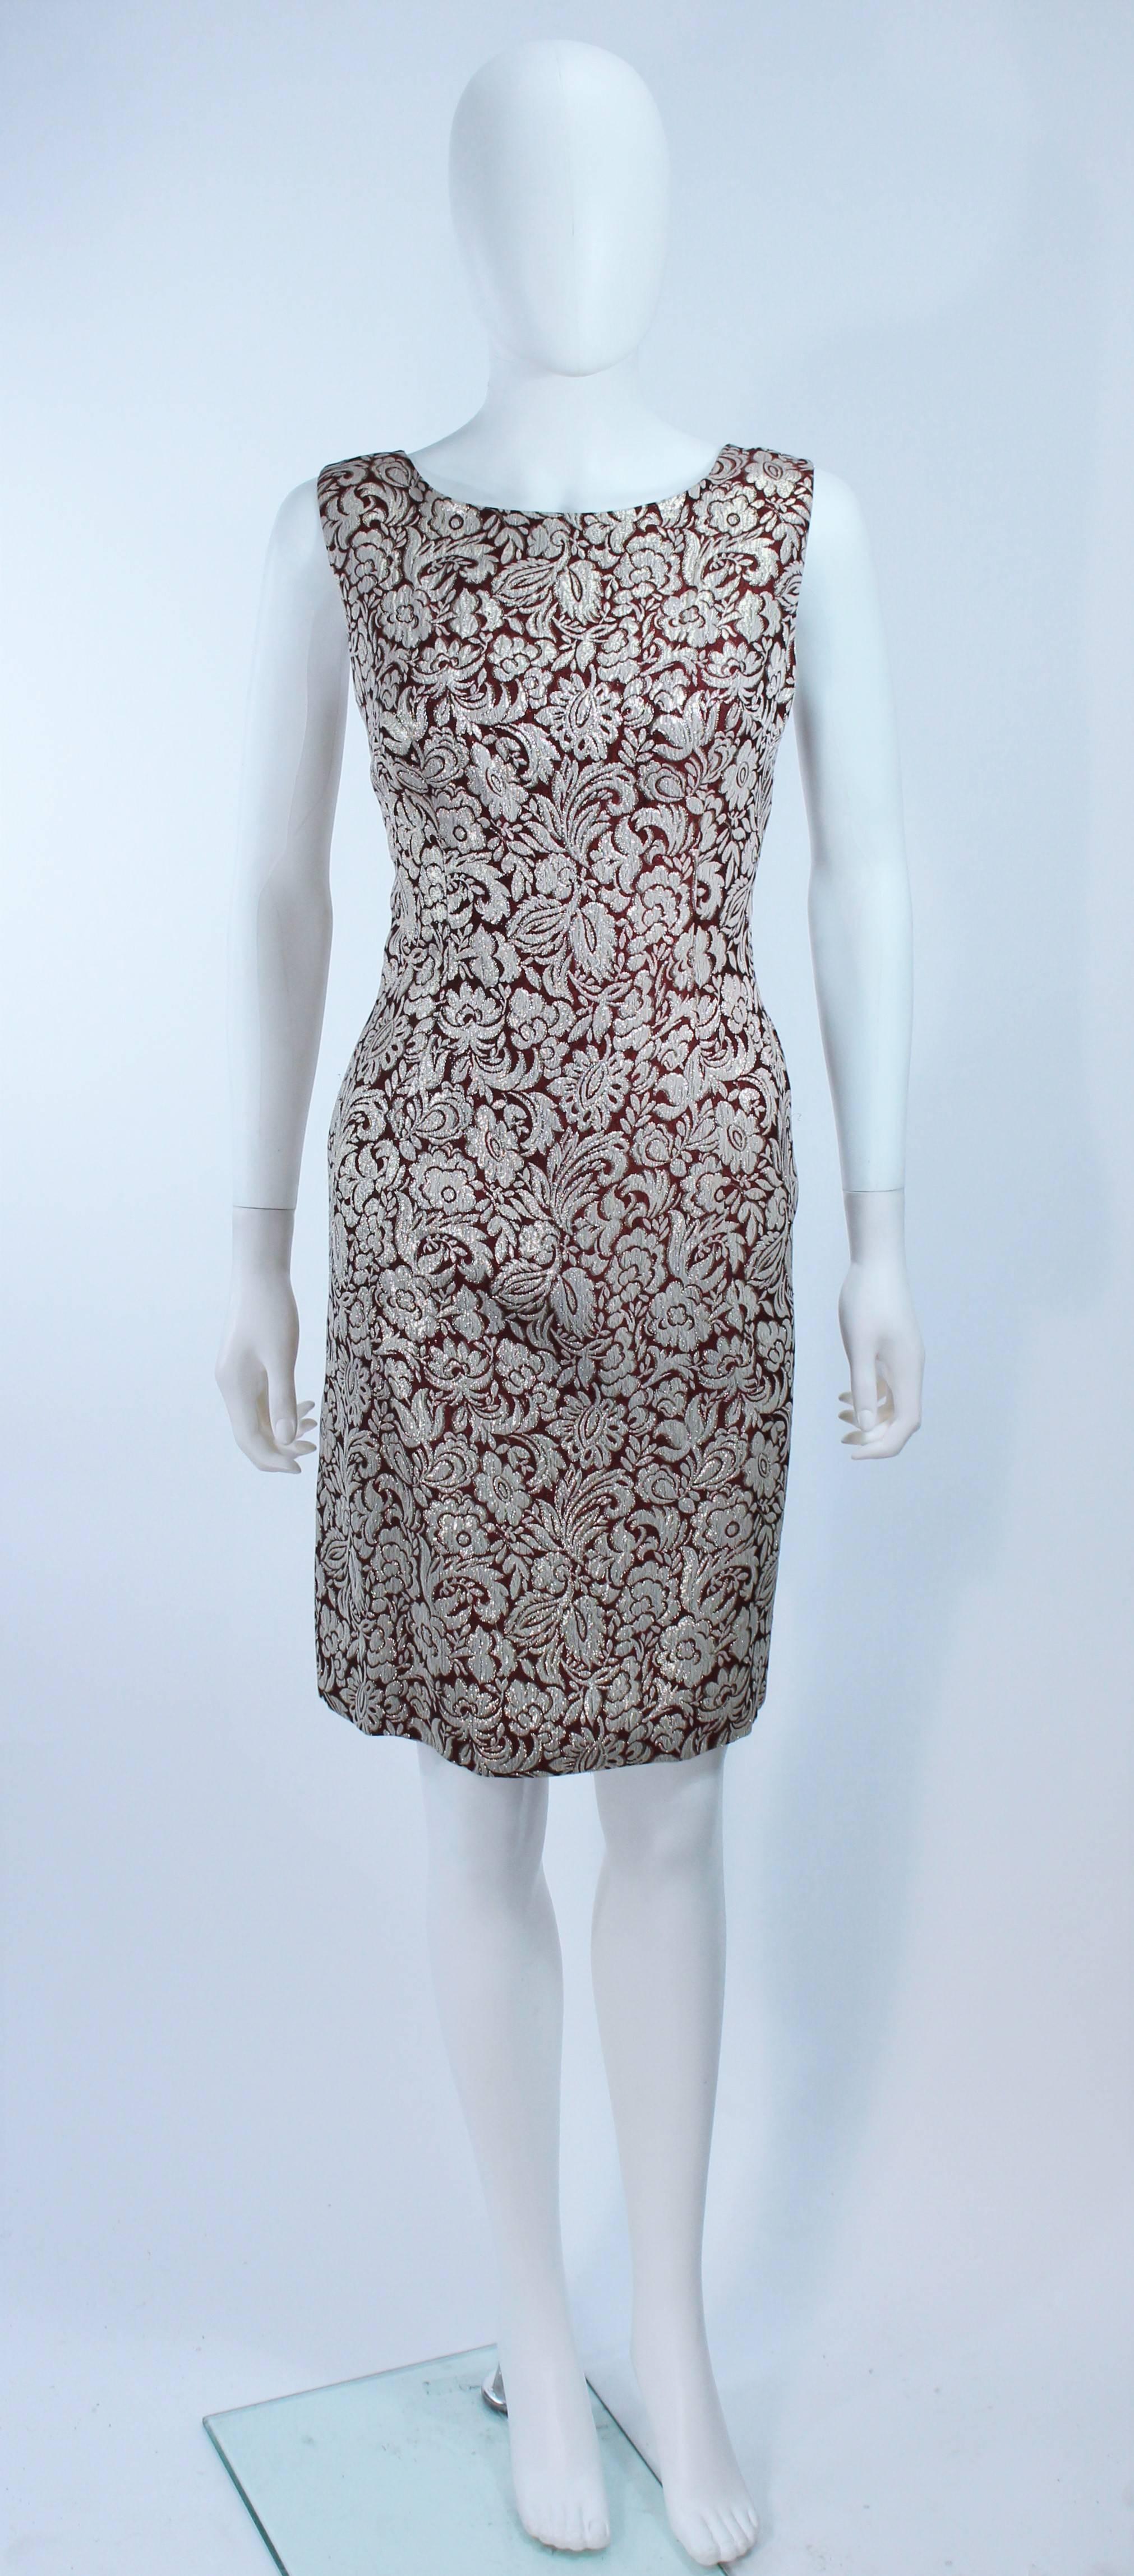 Burgundy Floral Brocade Metallic 1960's Mink Trim Dress Ensemble Size 4 In Excellent Condition For Sale In Los Angeles, CA